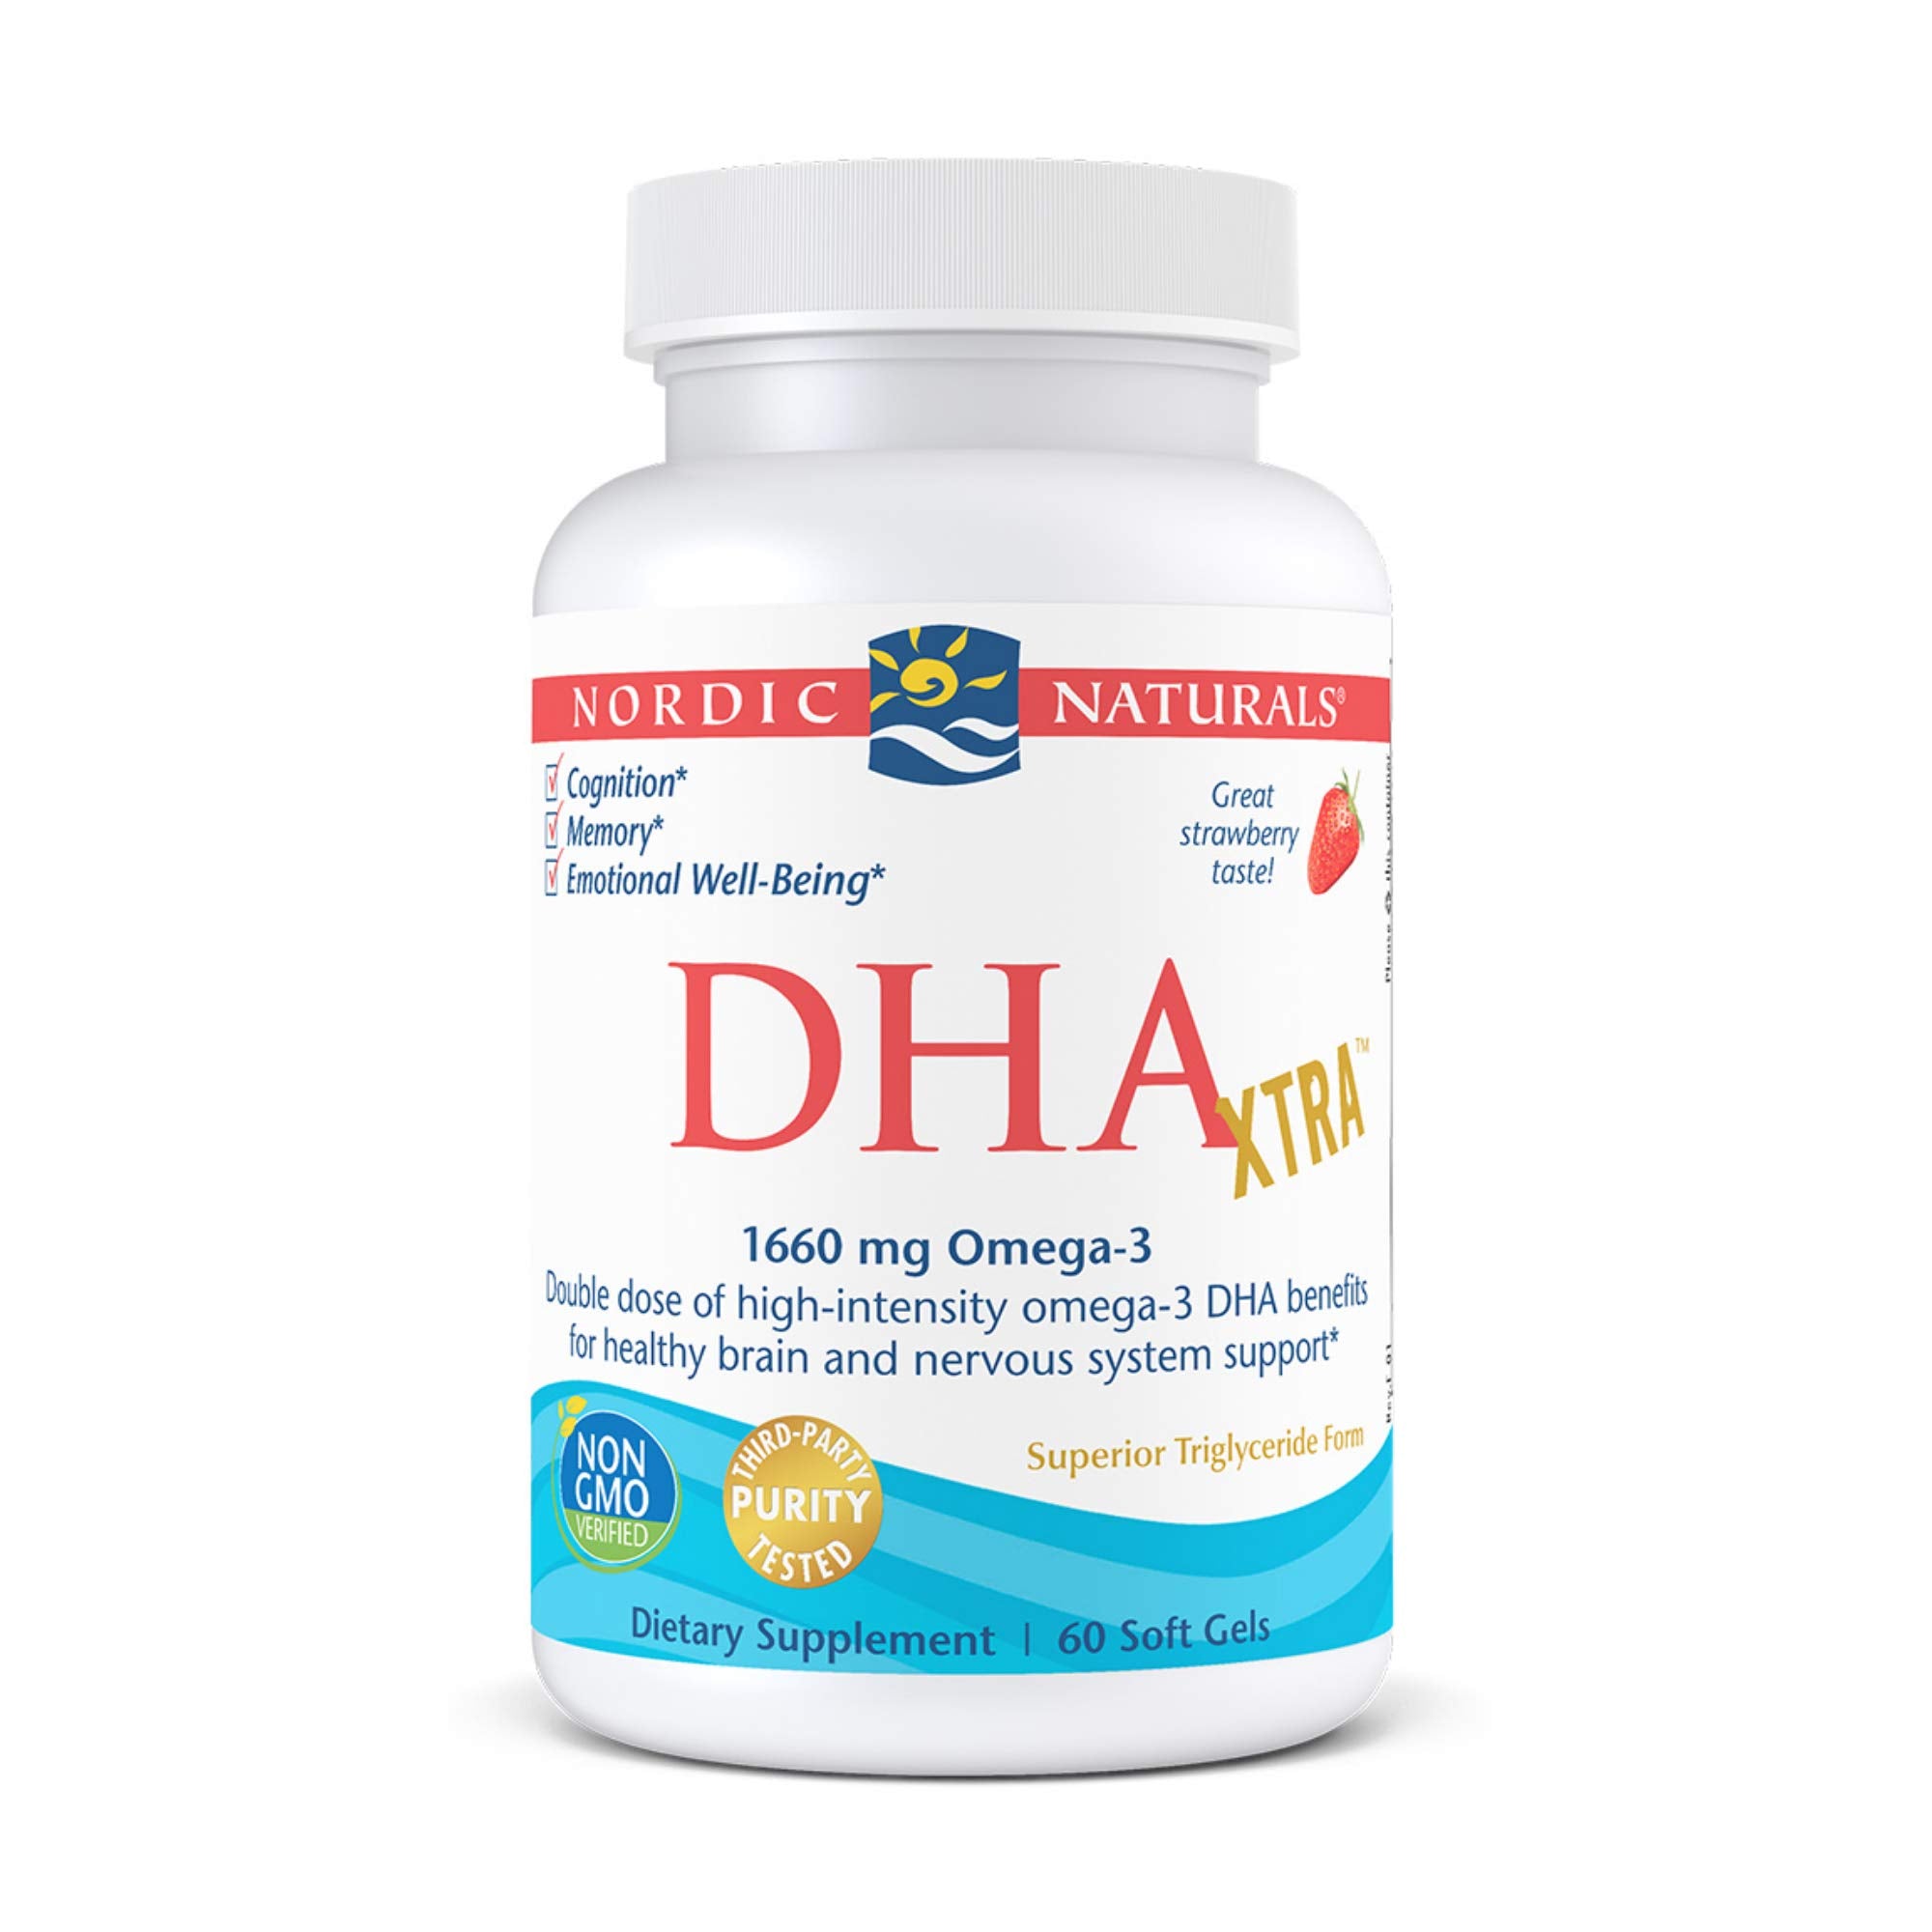 Nordic Naturals - DHA Xtra, Healthy Brain and Nervous System Support, 60 Soft Gels